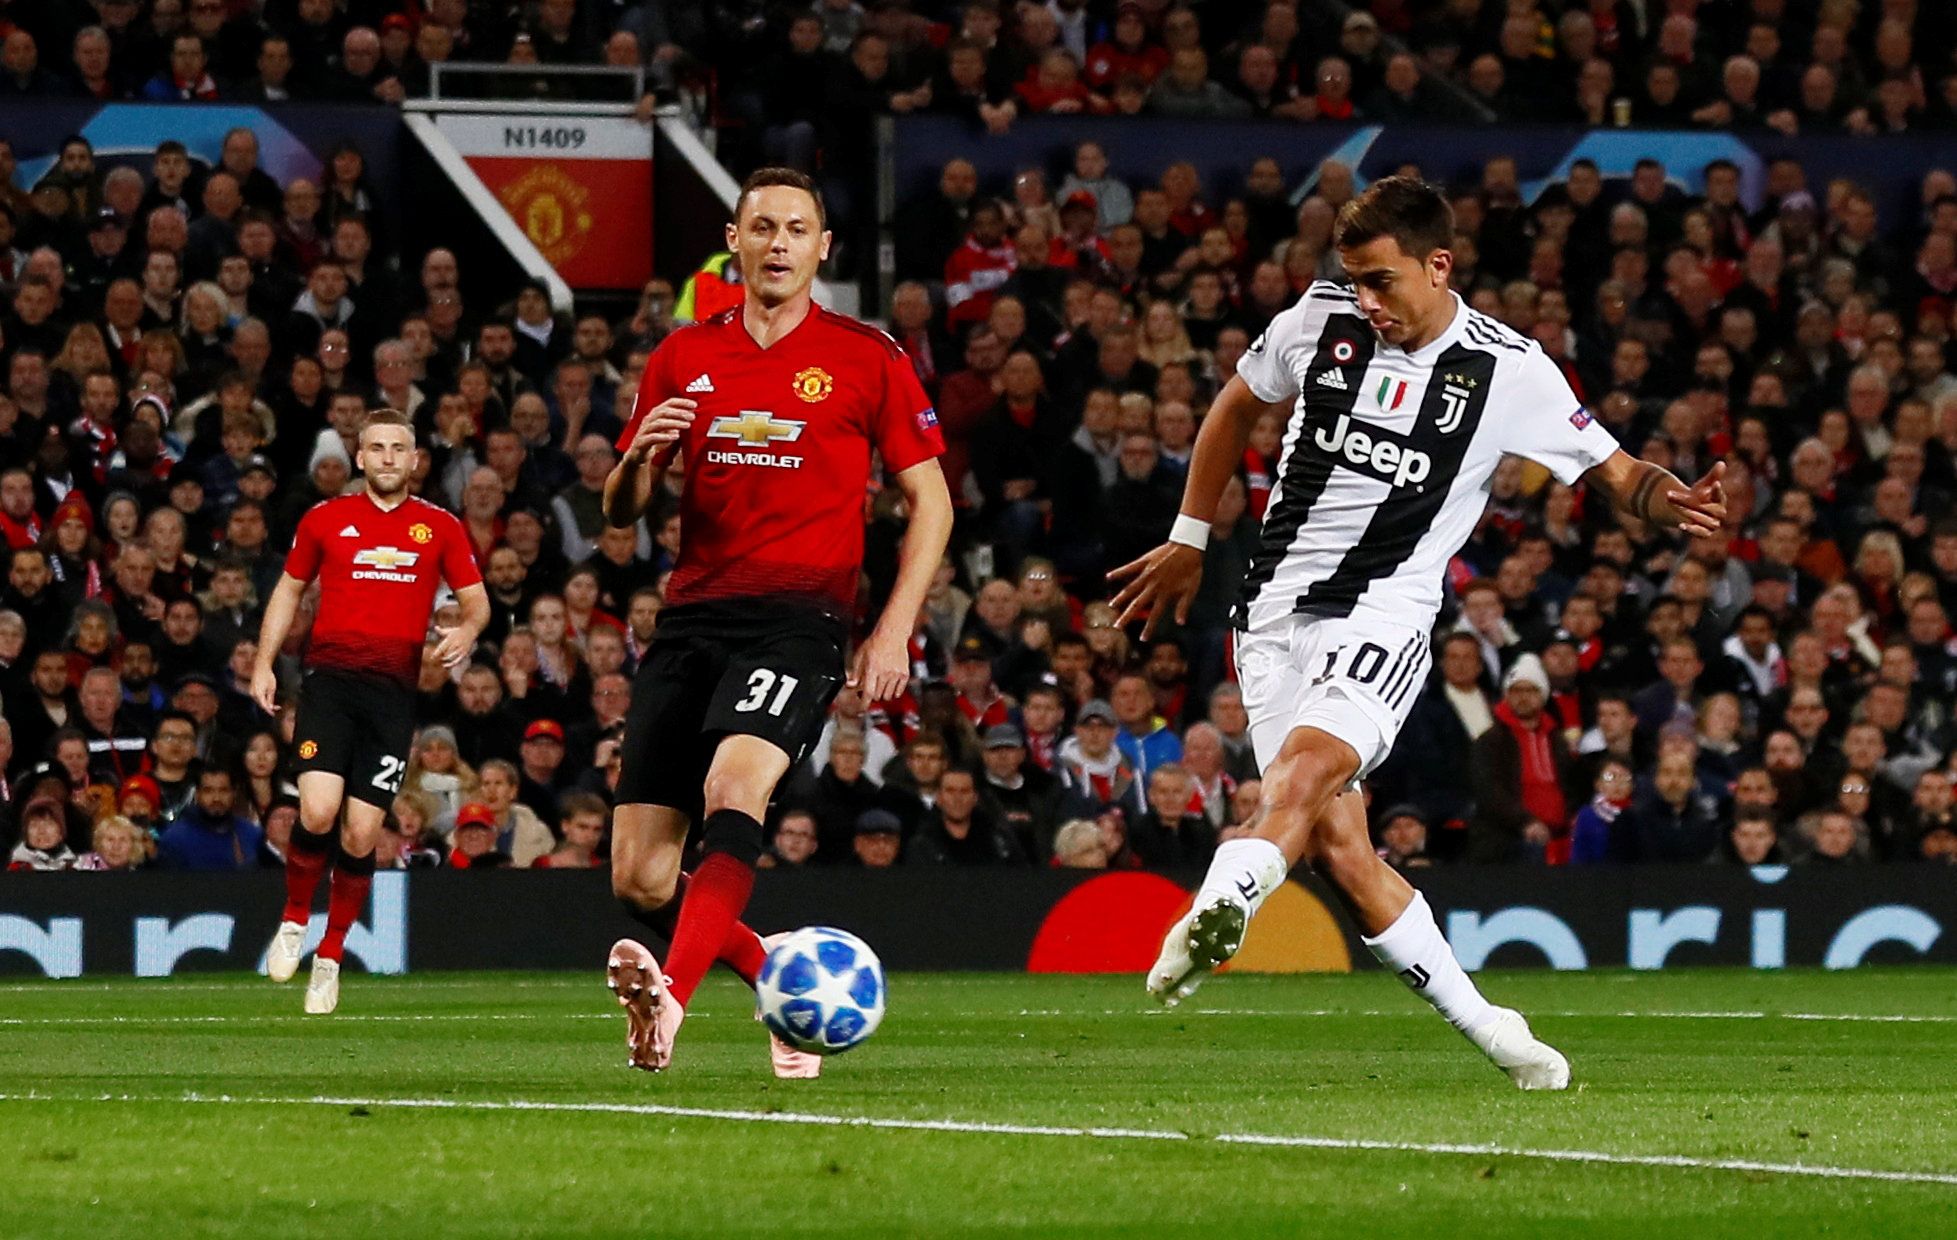 Soccer Football - Champions League - Group Stage - Group H - Manchester United v Juventus - Old Trafford, Manchester, Britain - October 23, 2018  Juventus' Paulo Dybala scores their first goal as Manchester United's Nemanja Matic looks on          Action Images via Reuters/Jason Cairnduff